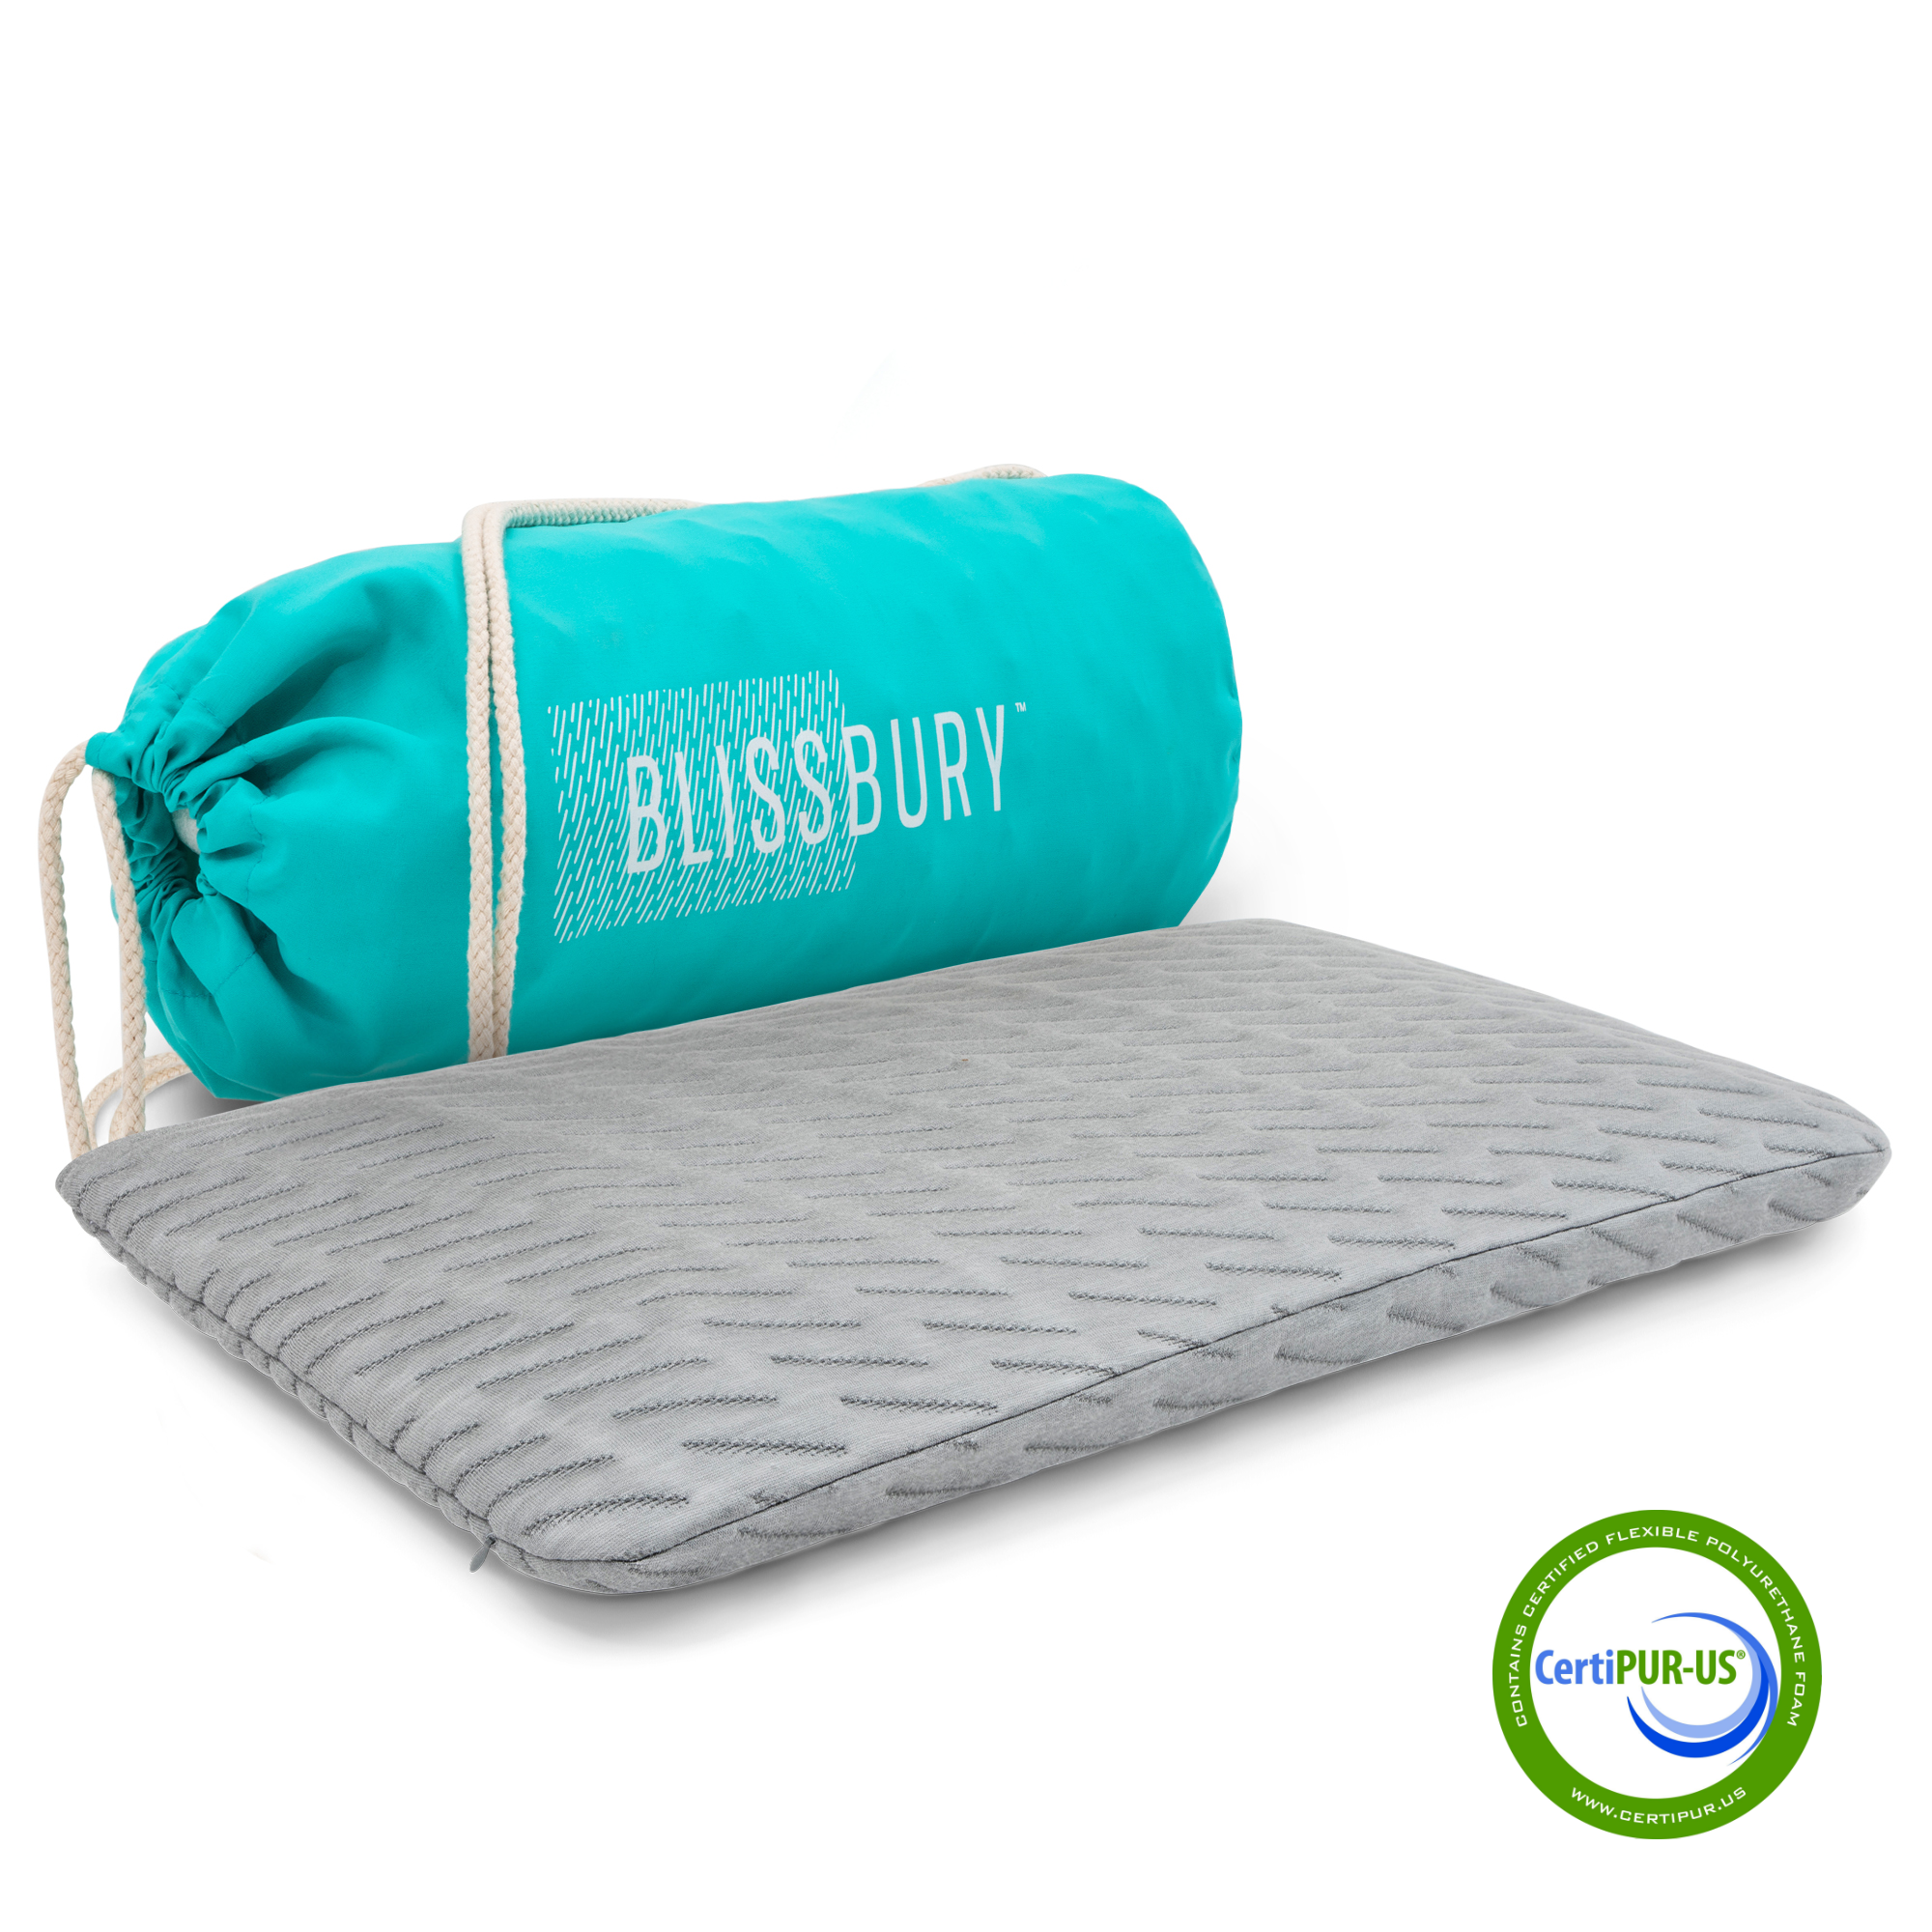 BLISSBURY Stomach Pillow Case (Case Only)